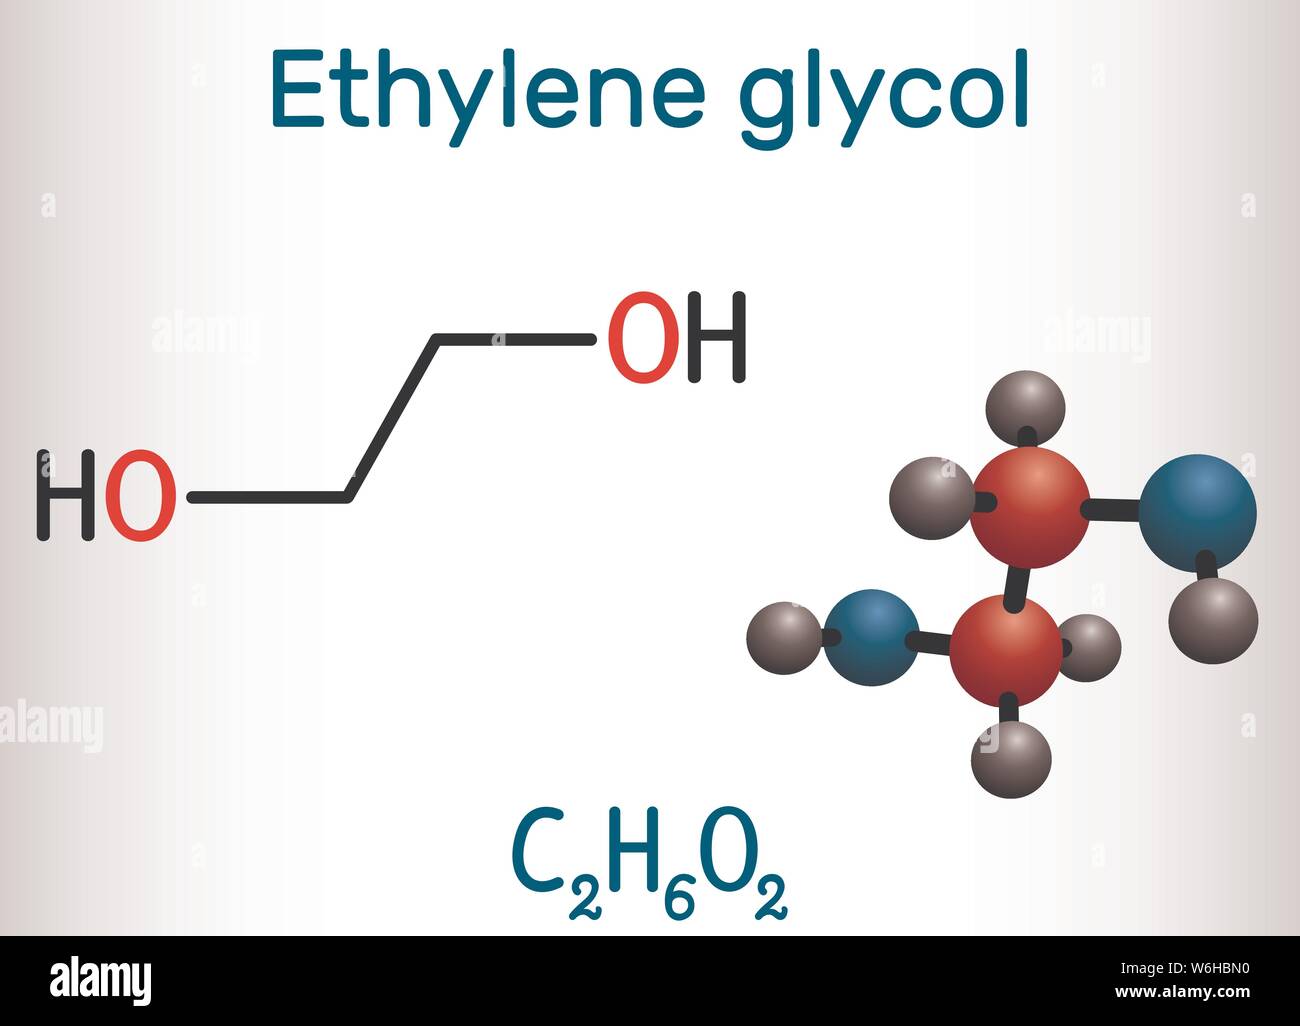 Ethylene glycol, diol molecule. It is used for manufacture of polyester fibers and for antifreeze formulations. Structural chemical formula and molecu Stock Vector